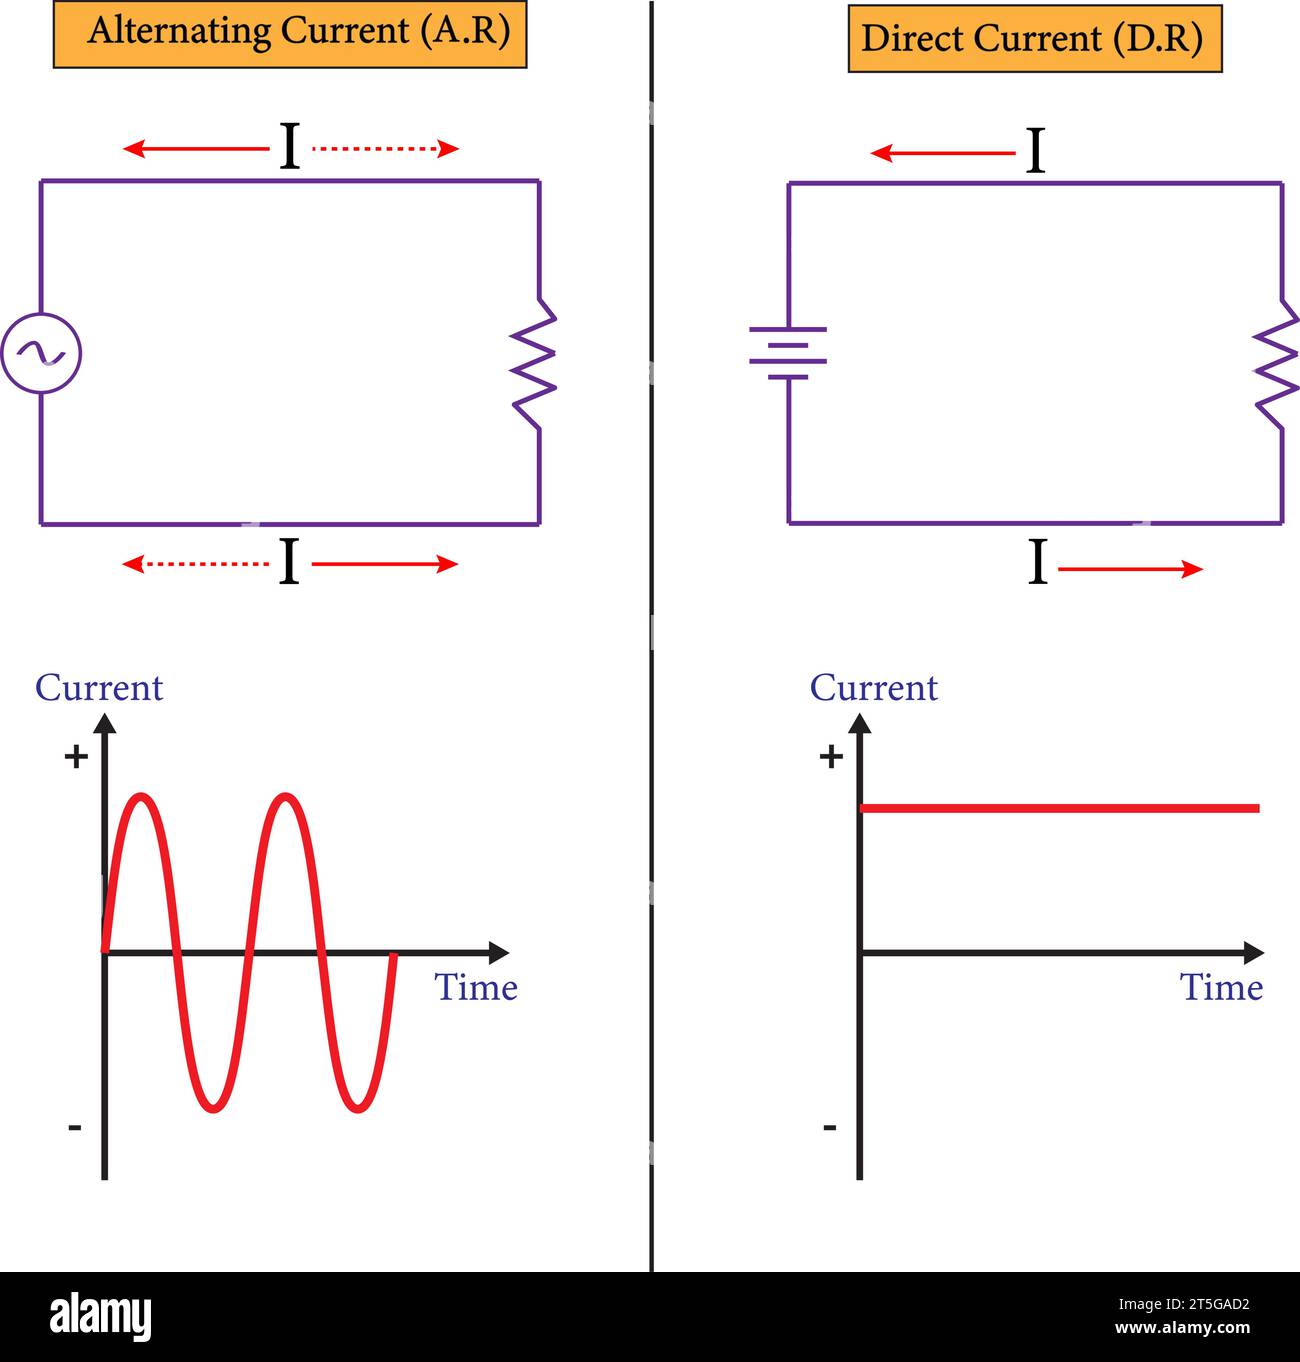 graph showing the variation of current with time for alternating current and direct current.Vector illustration. Stock Vector